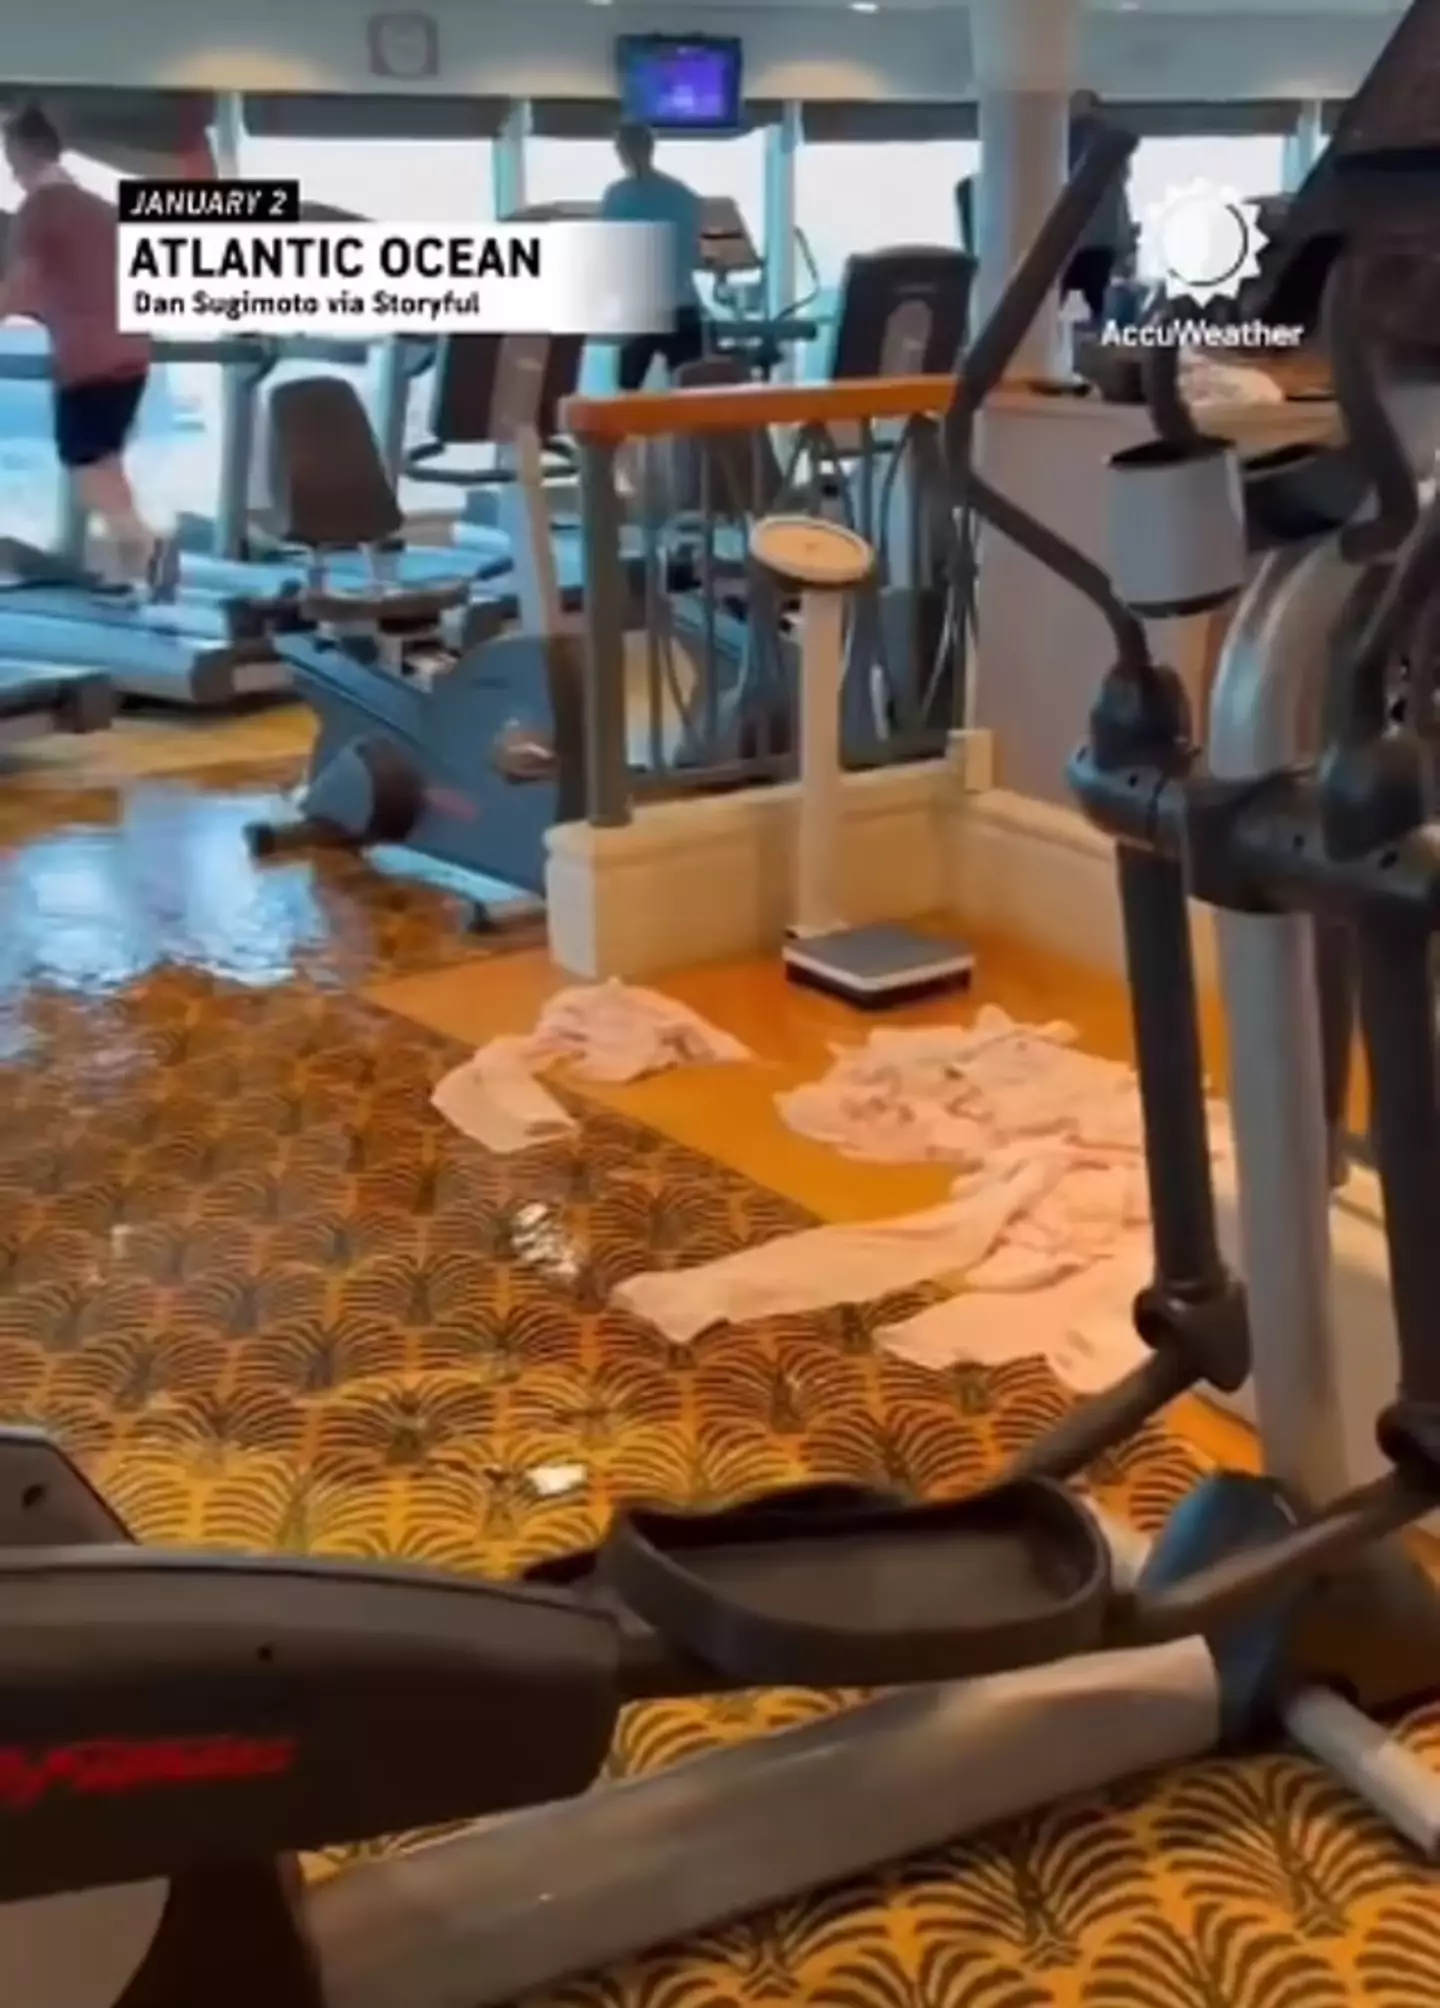 The flooded gym on the cruise ship.